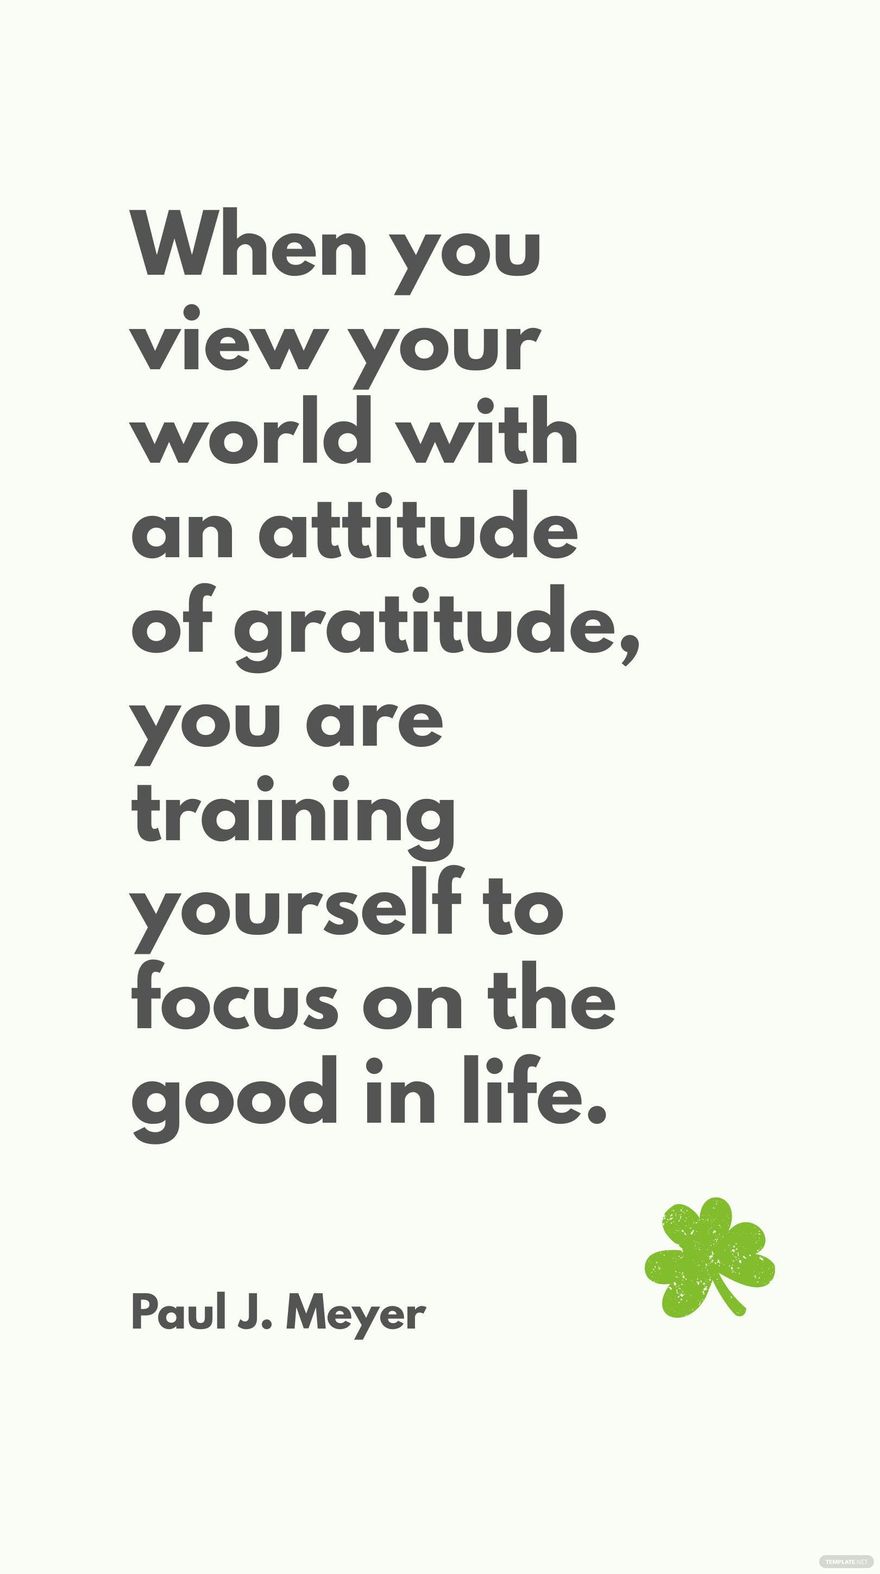 Paul J. Meyer - When you view your world with an attitude of gratitude, you are training yourself to focus on the good in life.